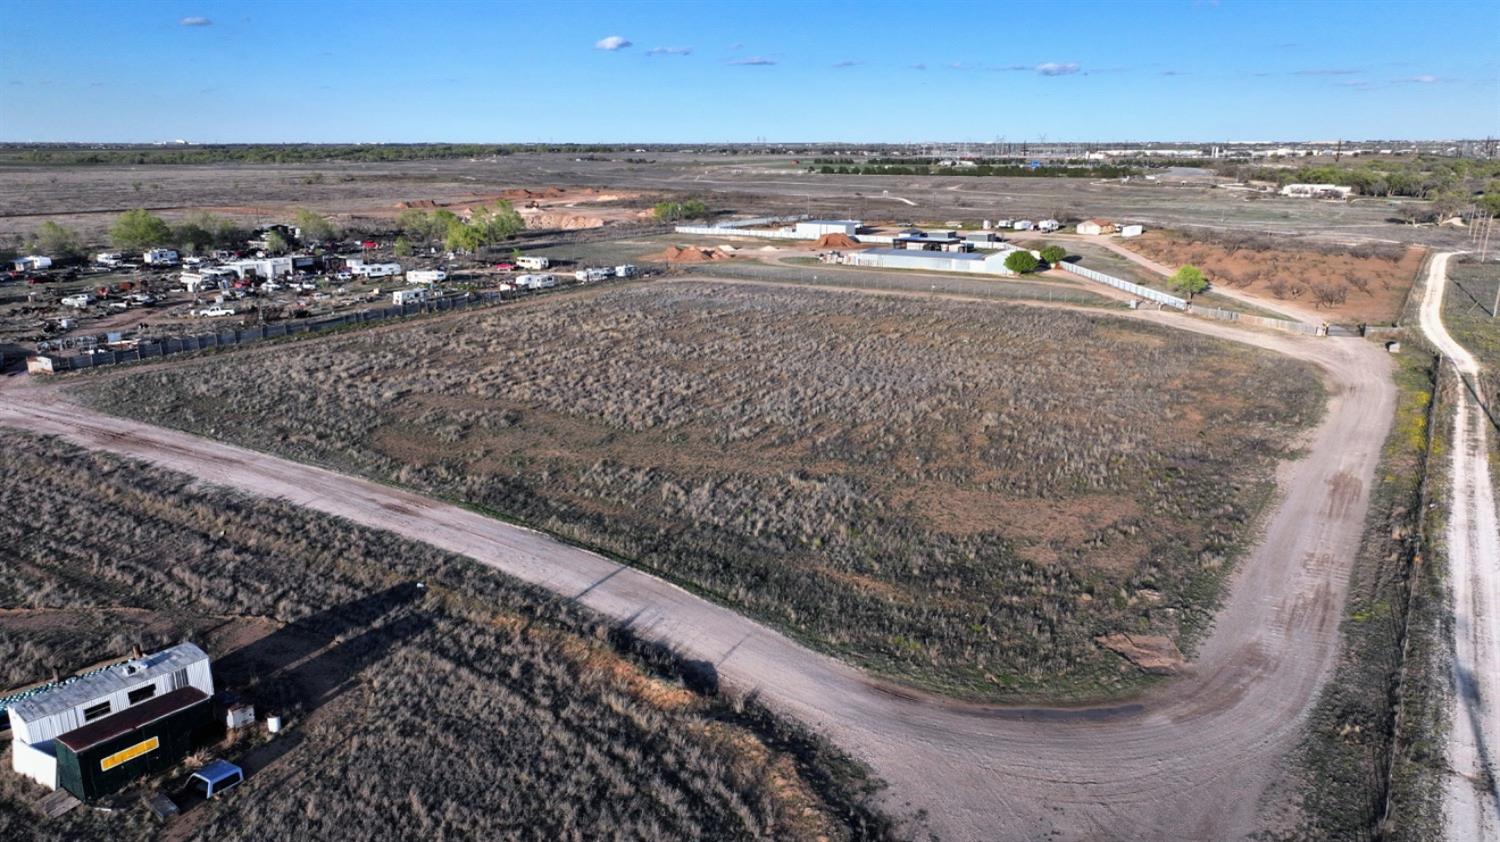 Fantastic investment opportunity: 5 acres of unrestricted commercial land located in a designated opportunity zone. Ideal for development or investment purposes. Don't miss out on this chance to capitalize on tax incentives and potential growth!